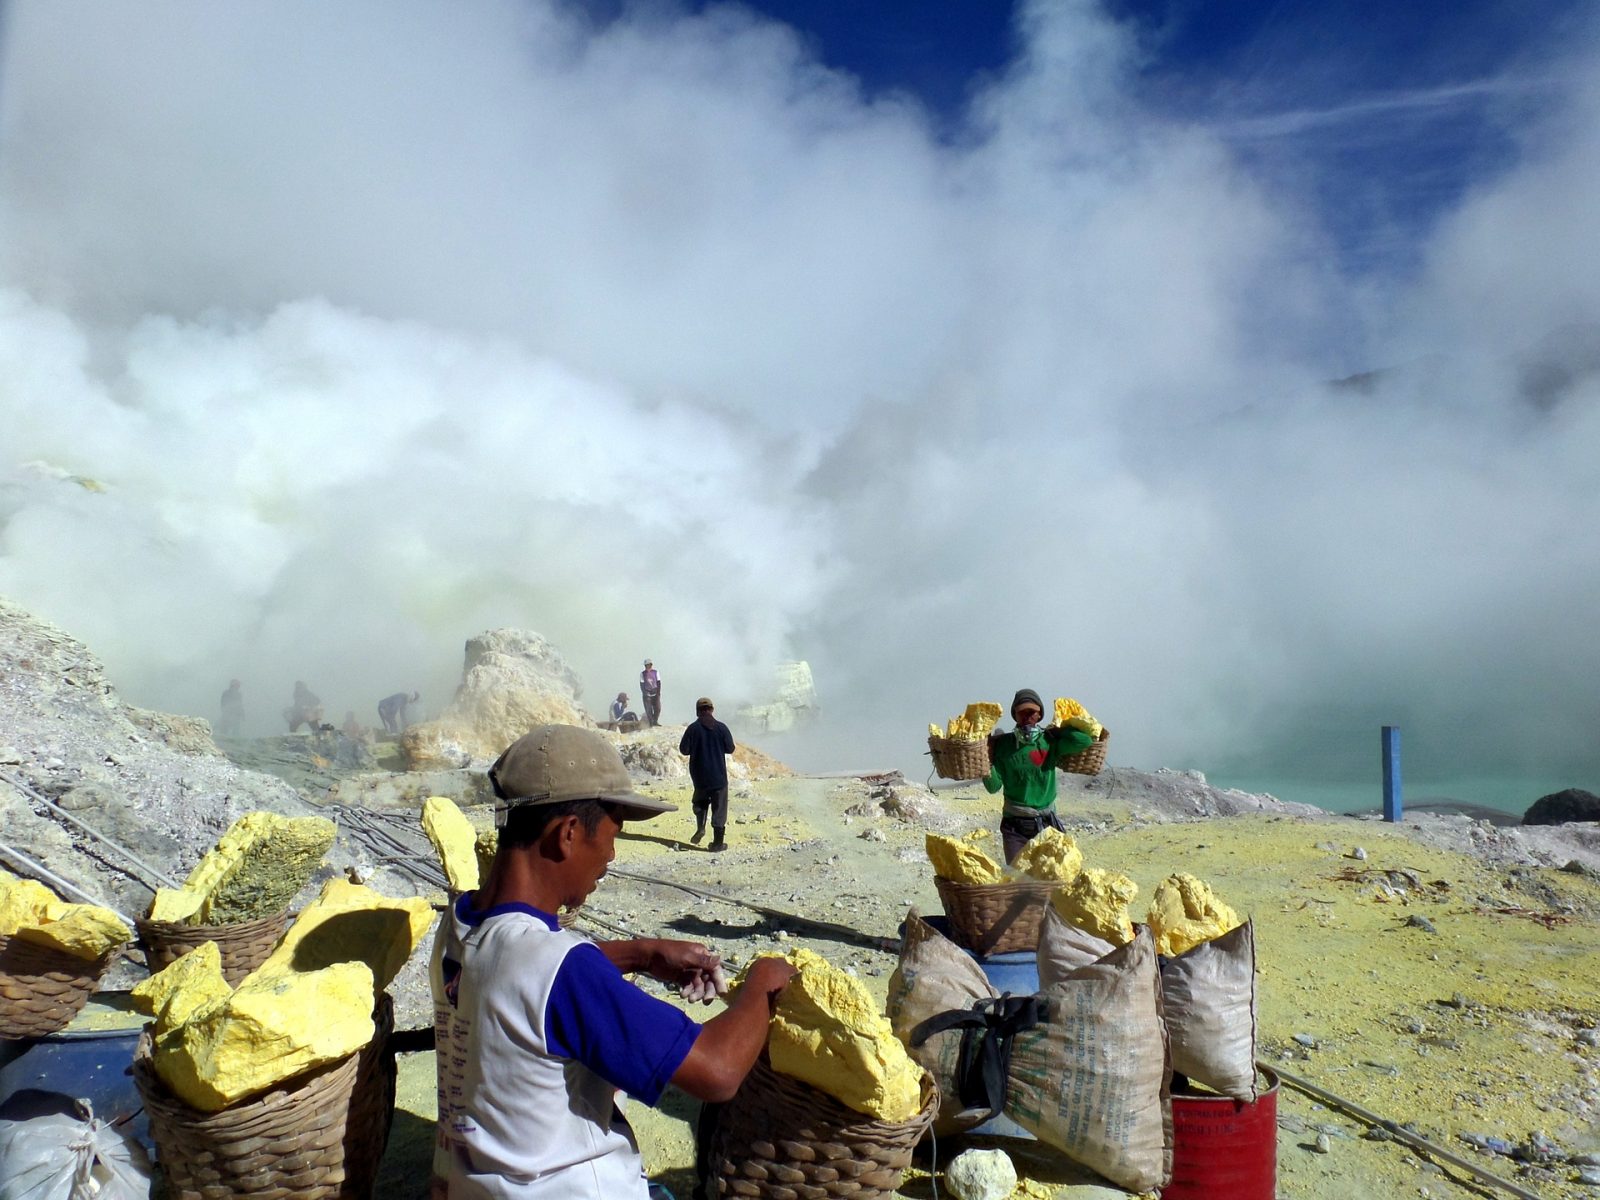 Miners at Ijen Crater, East Java, Indonesia 